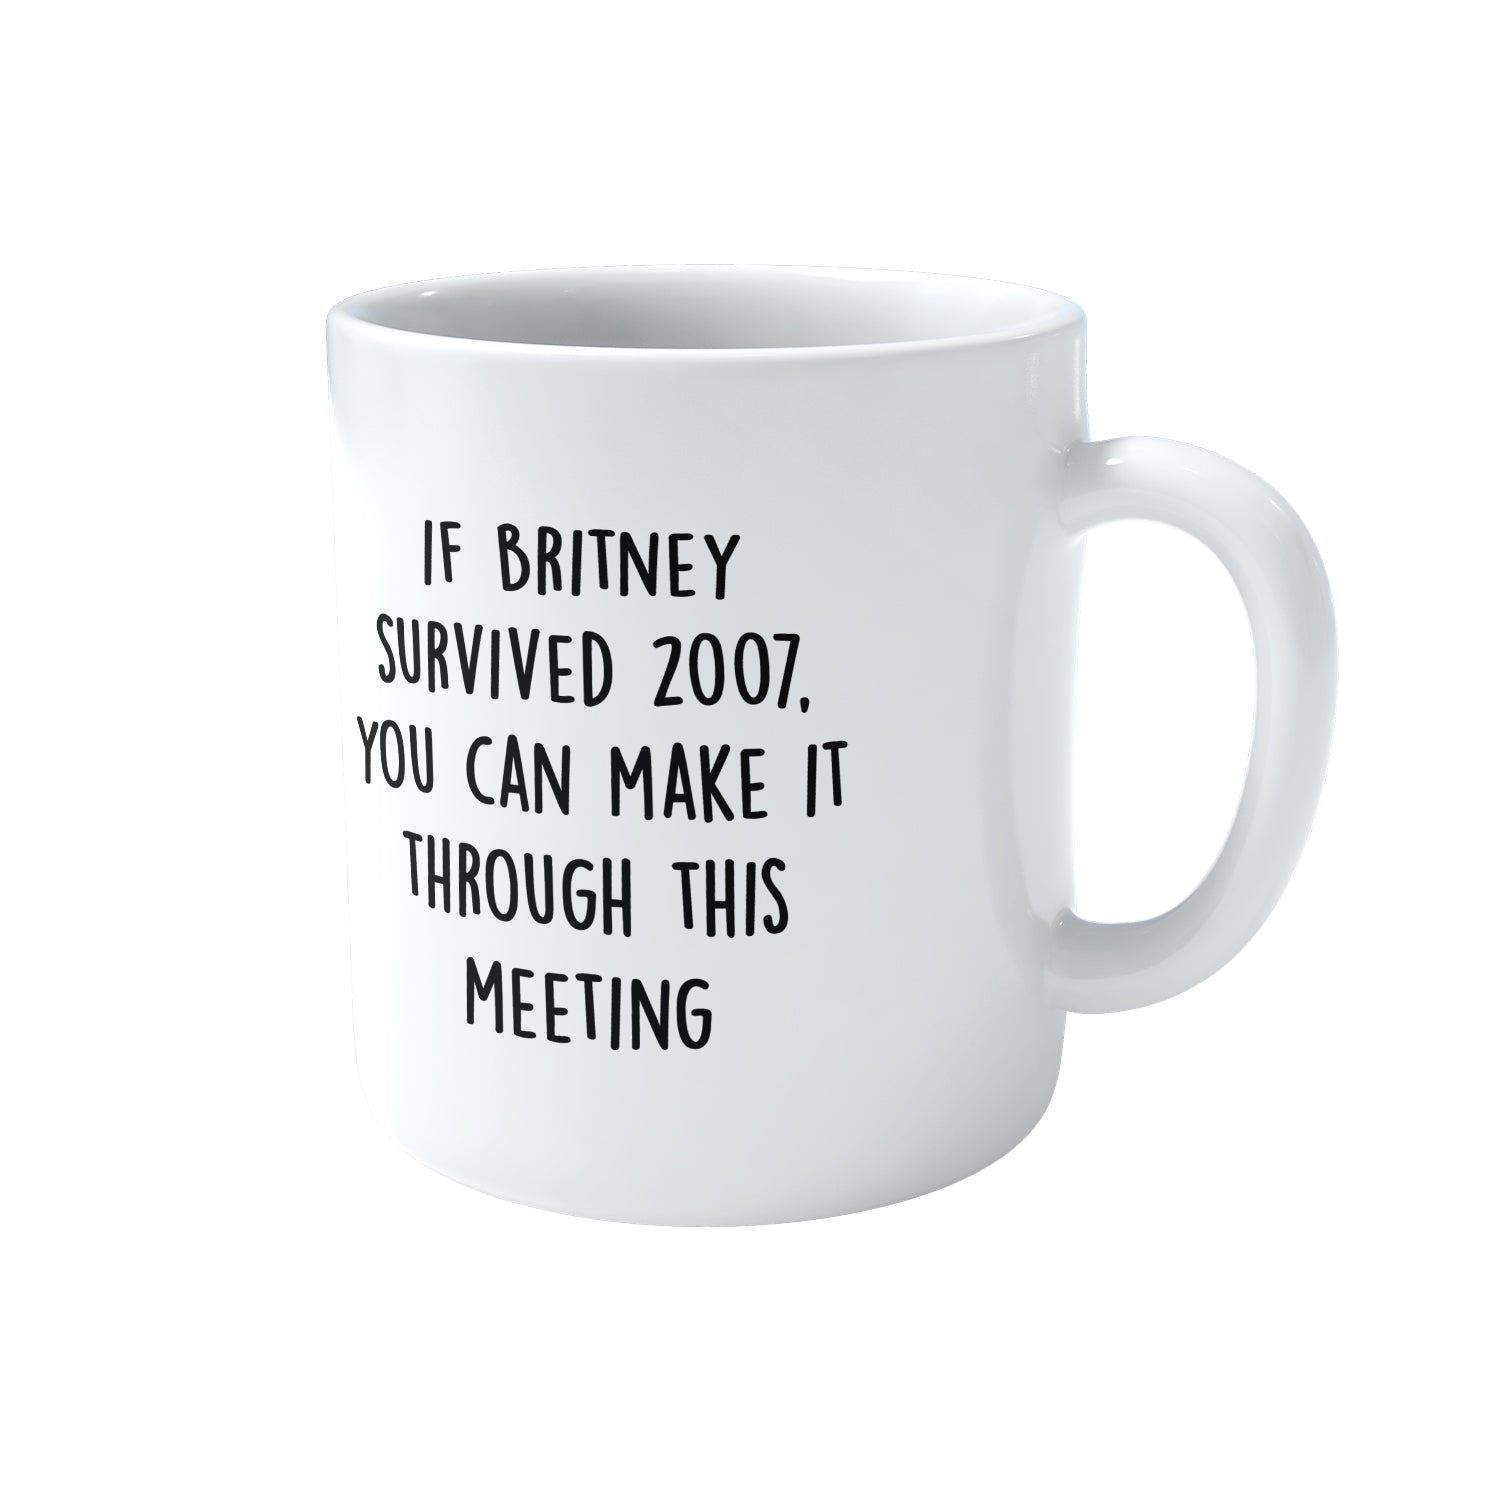 If Britney survived 2007, you can make it through this meeting Mug